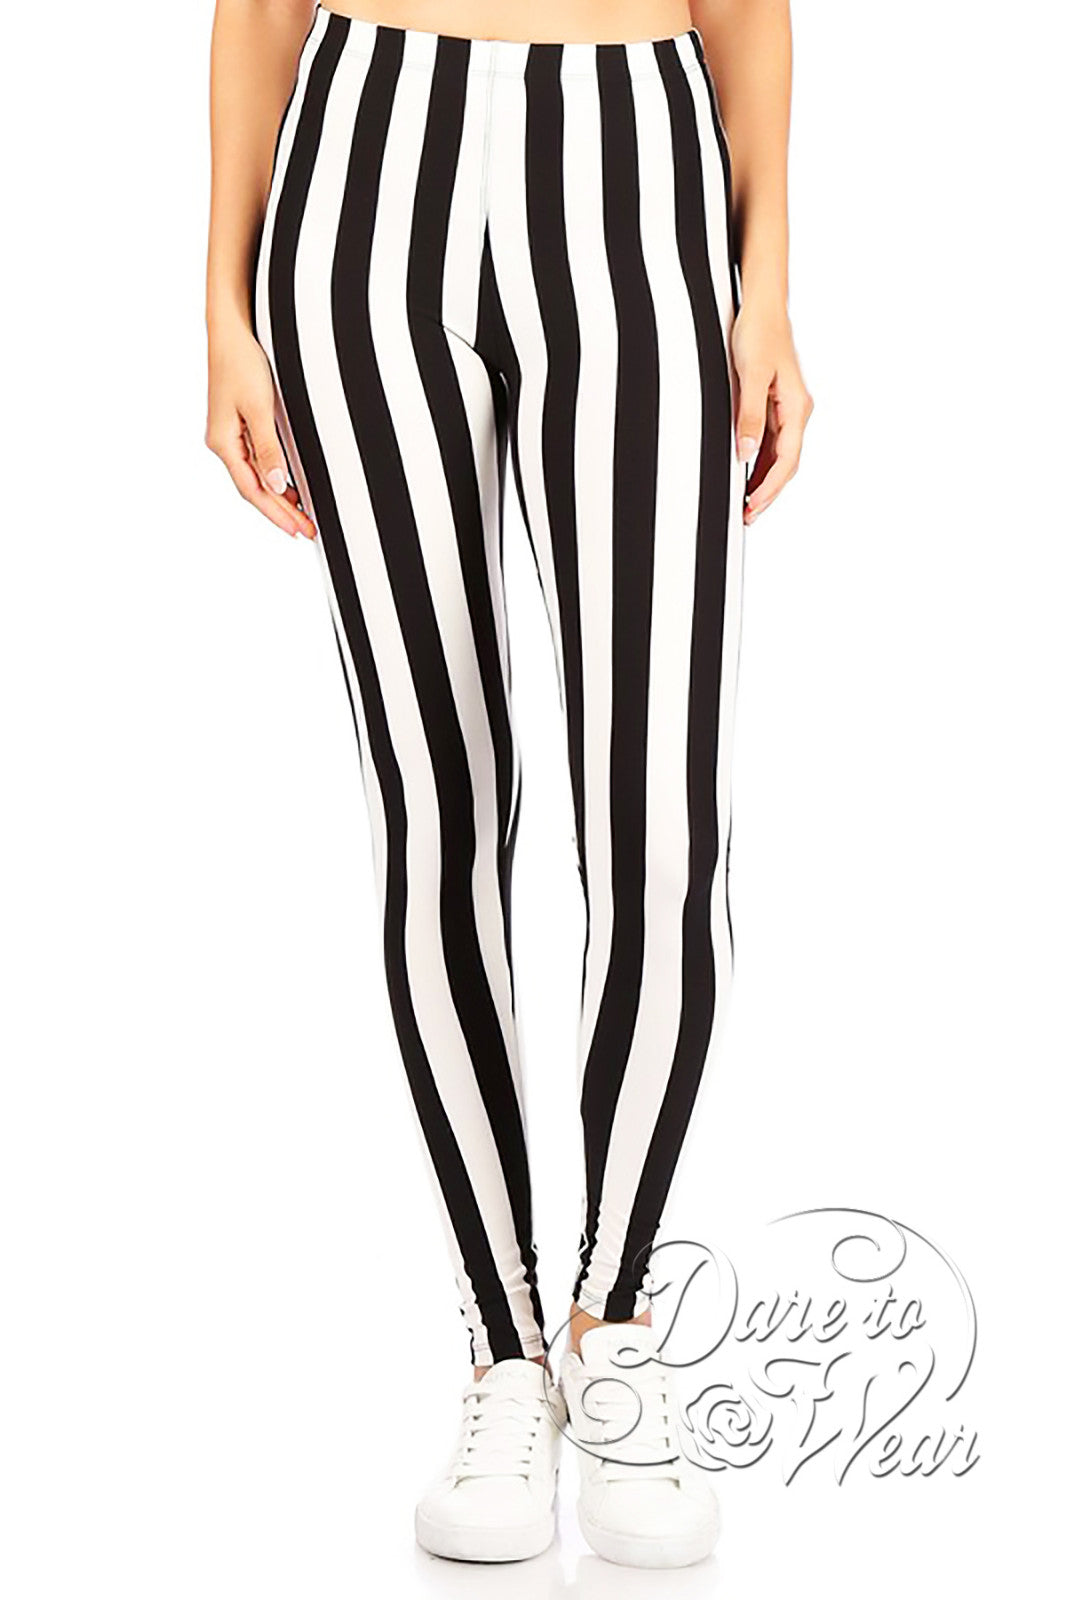 Black and White Pinstripe High Waisted Body Sculpting Treggings